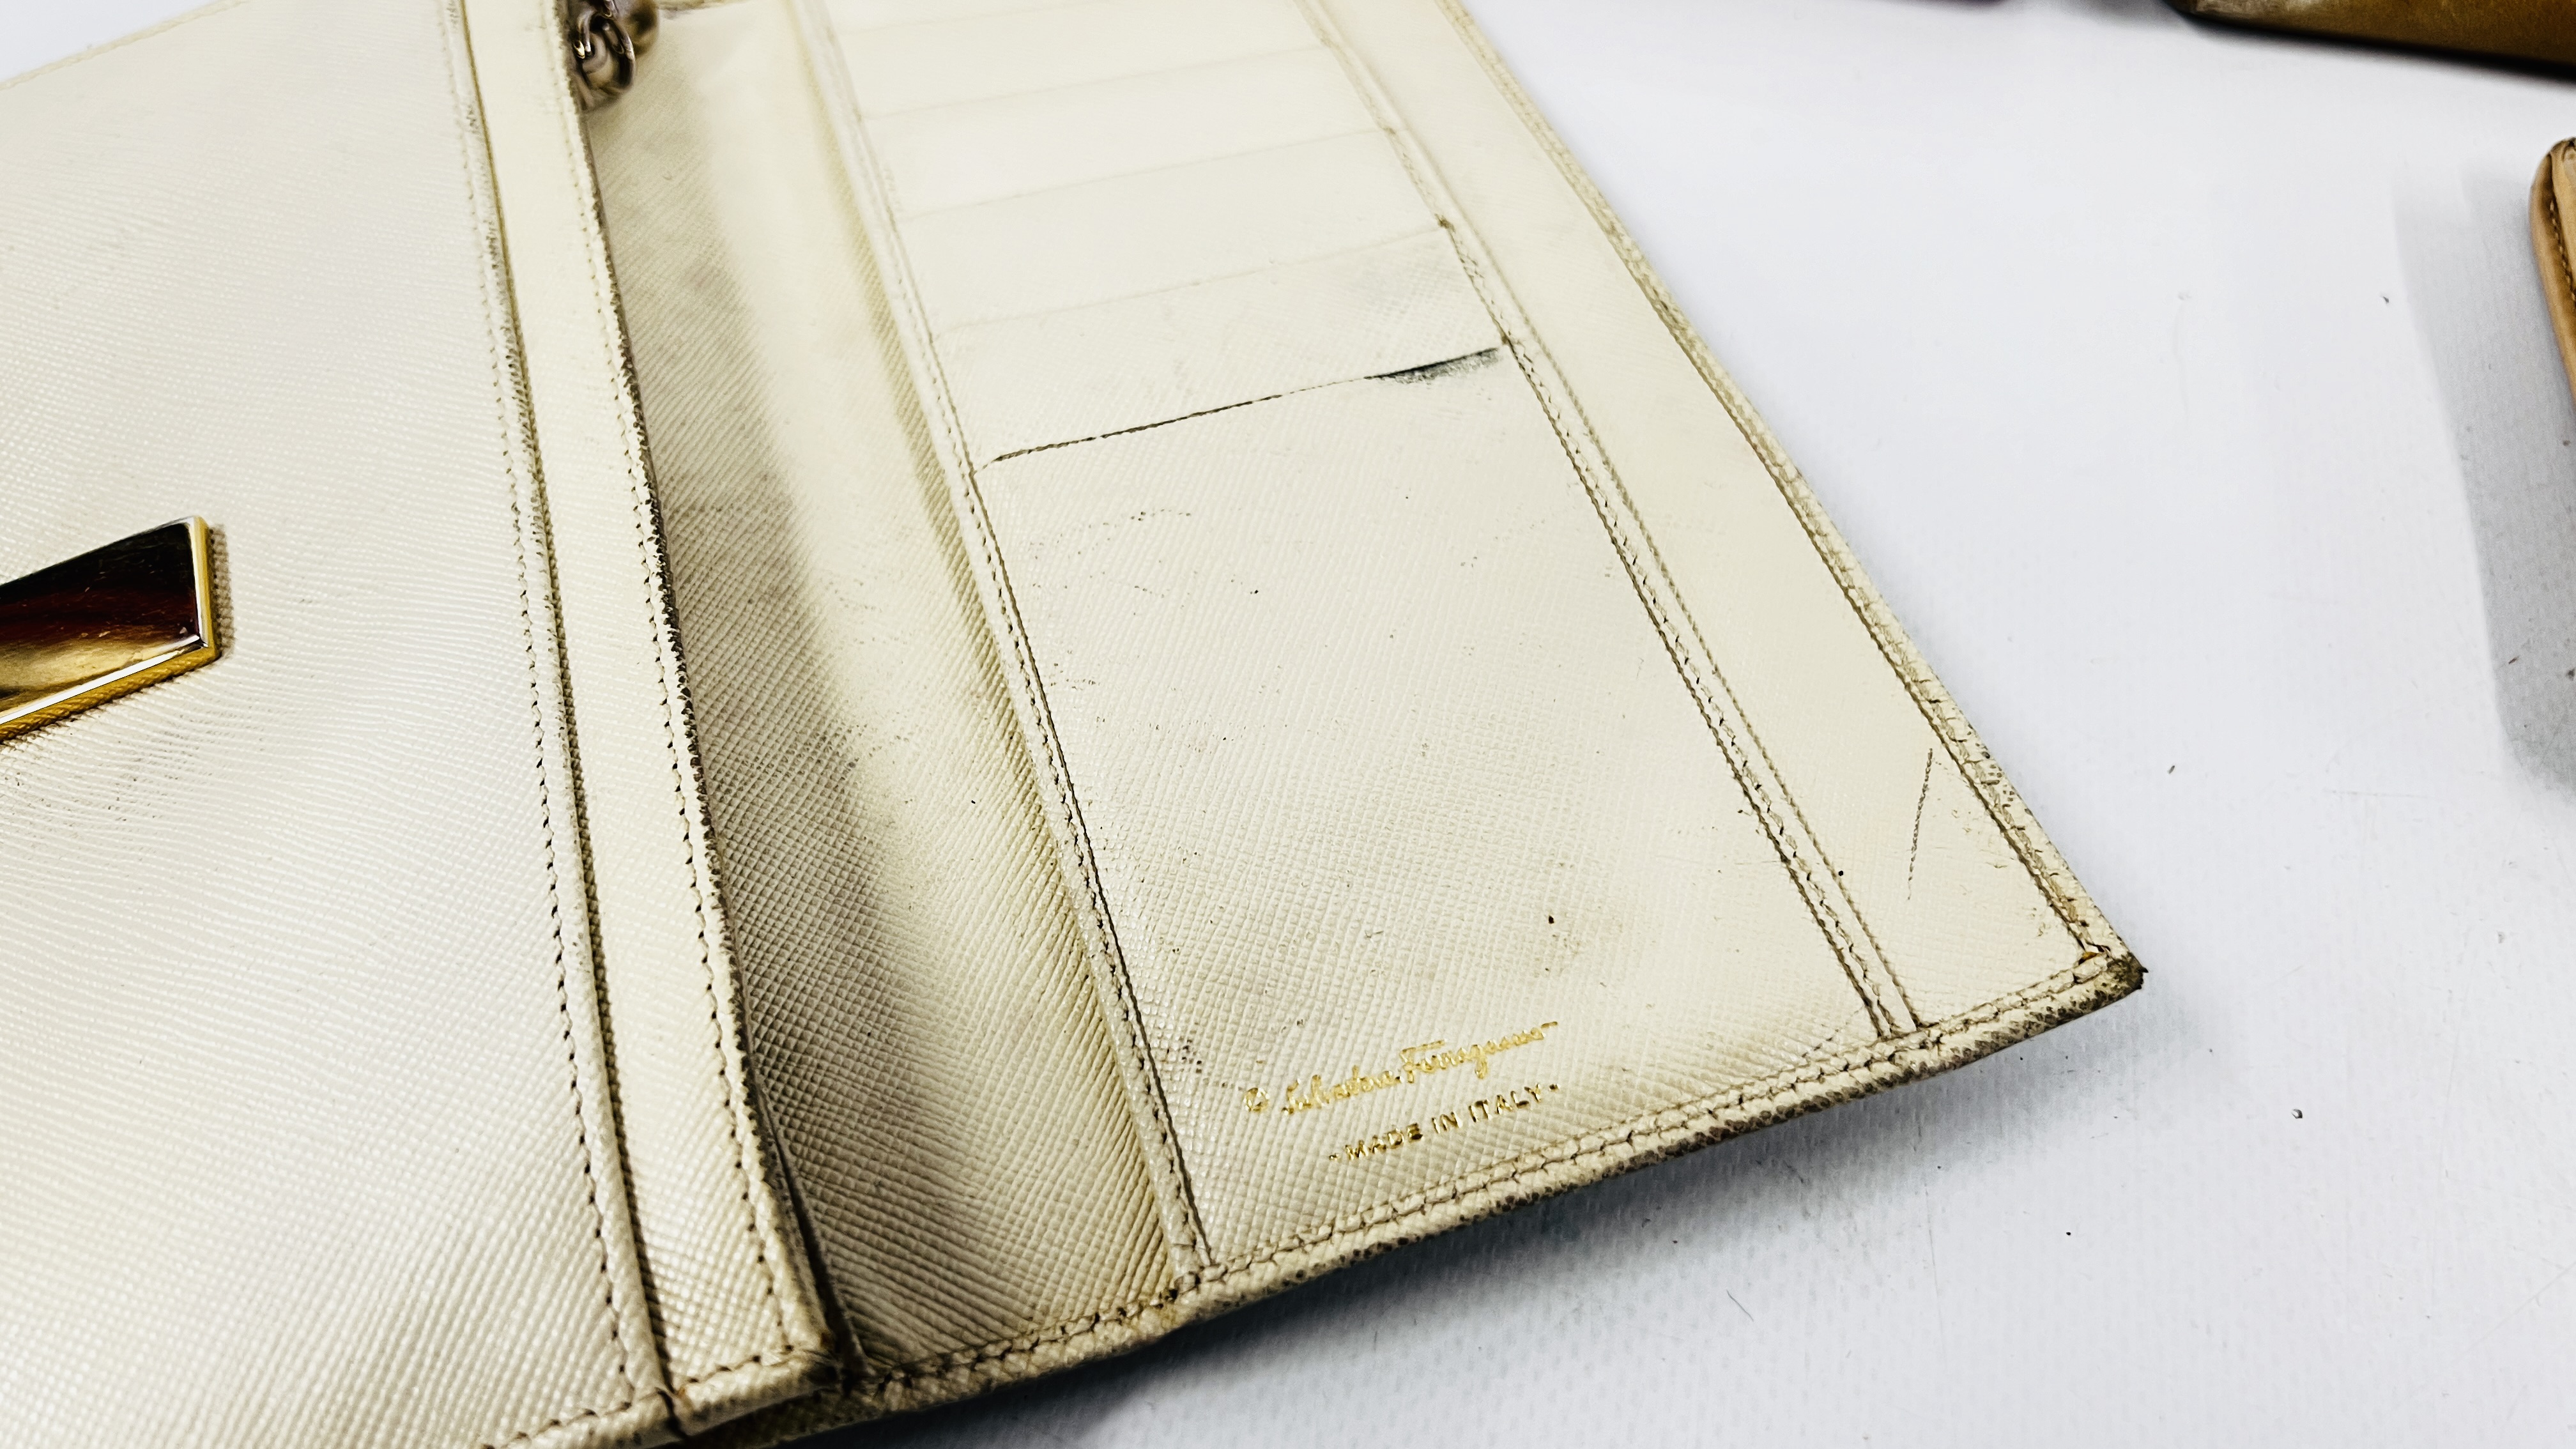 A COLLECTION OF 11 DESIGNER PURSES MARKED "SALVADOR FERRAGAMA". - Image 3 of 6